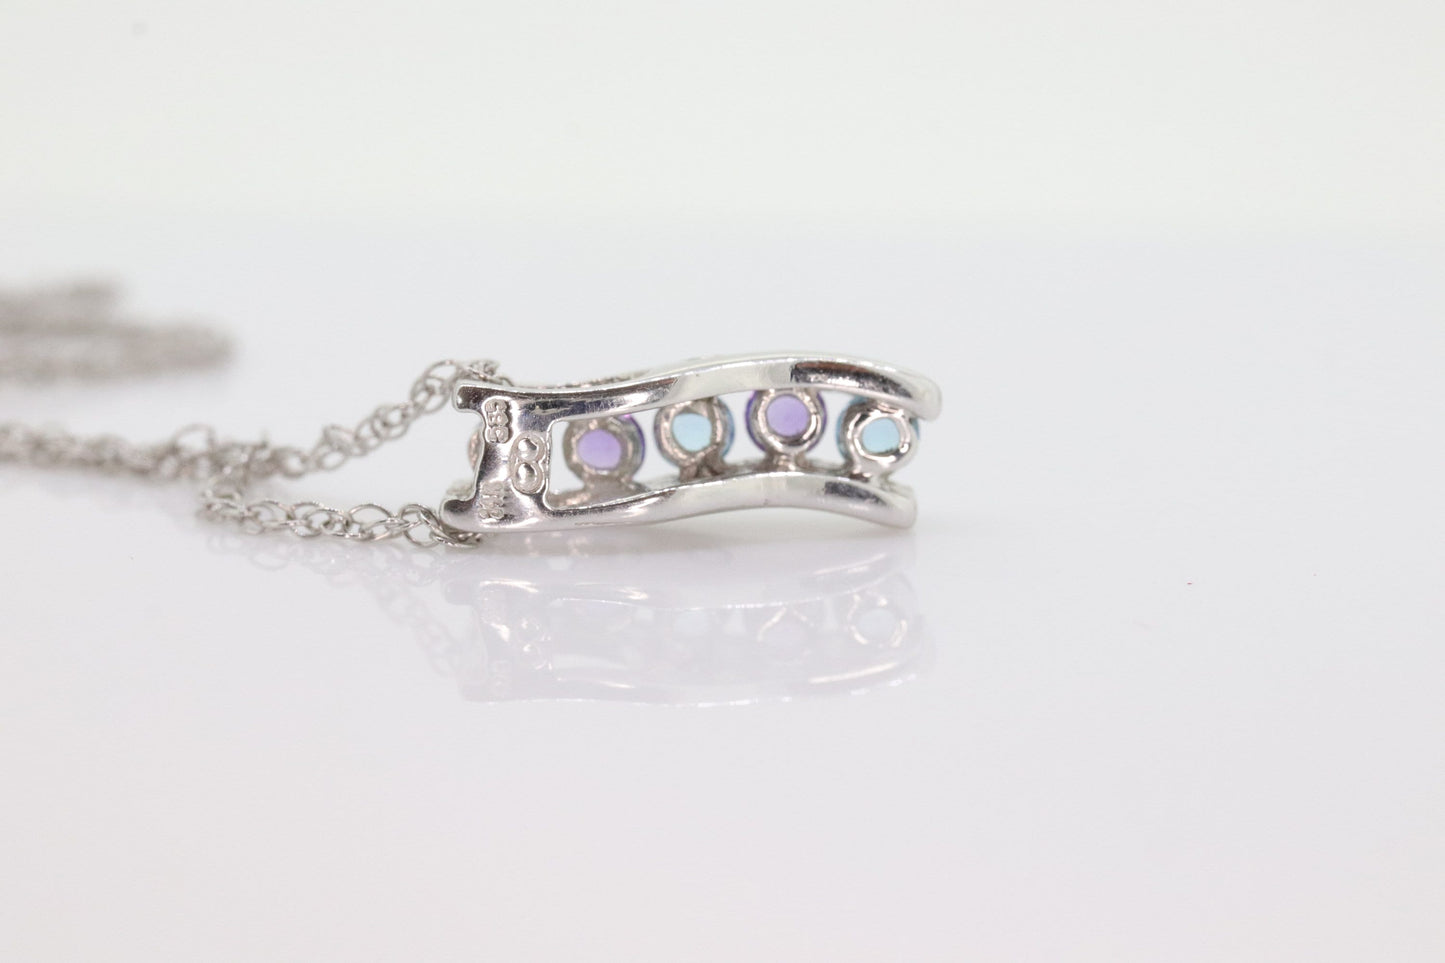 14k Blue TOPAZ and Amethyst Pendant. High quality CANDY Journey pendant. Italian. 14k cable Chain Necklace. st(80)